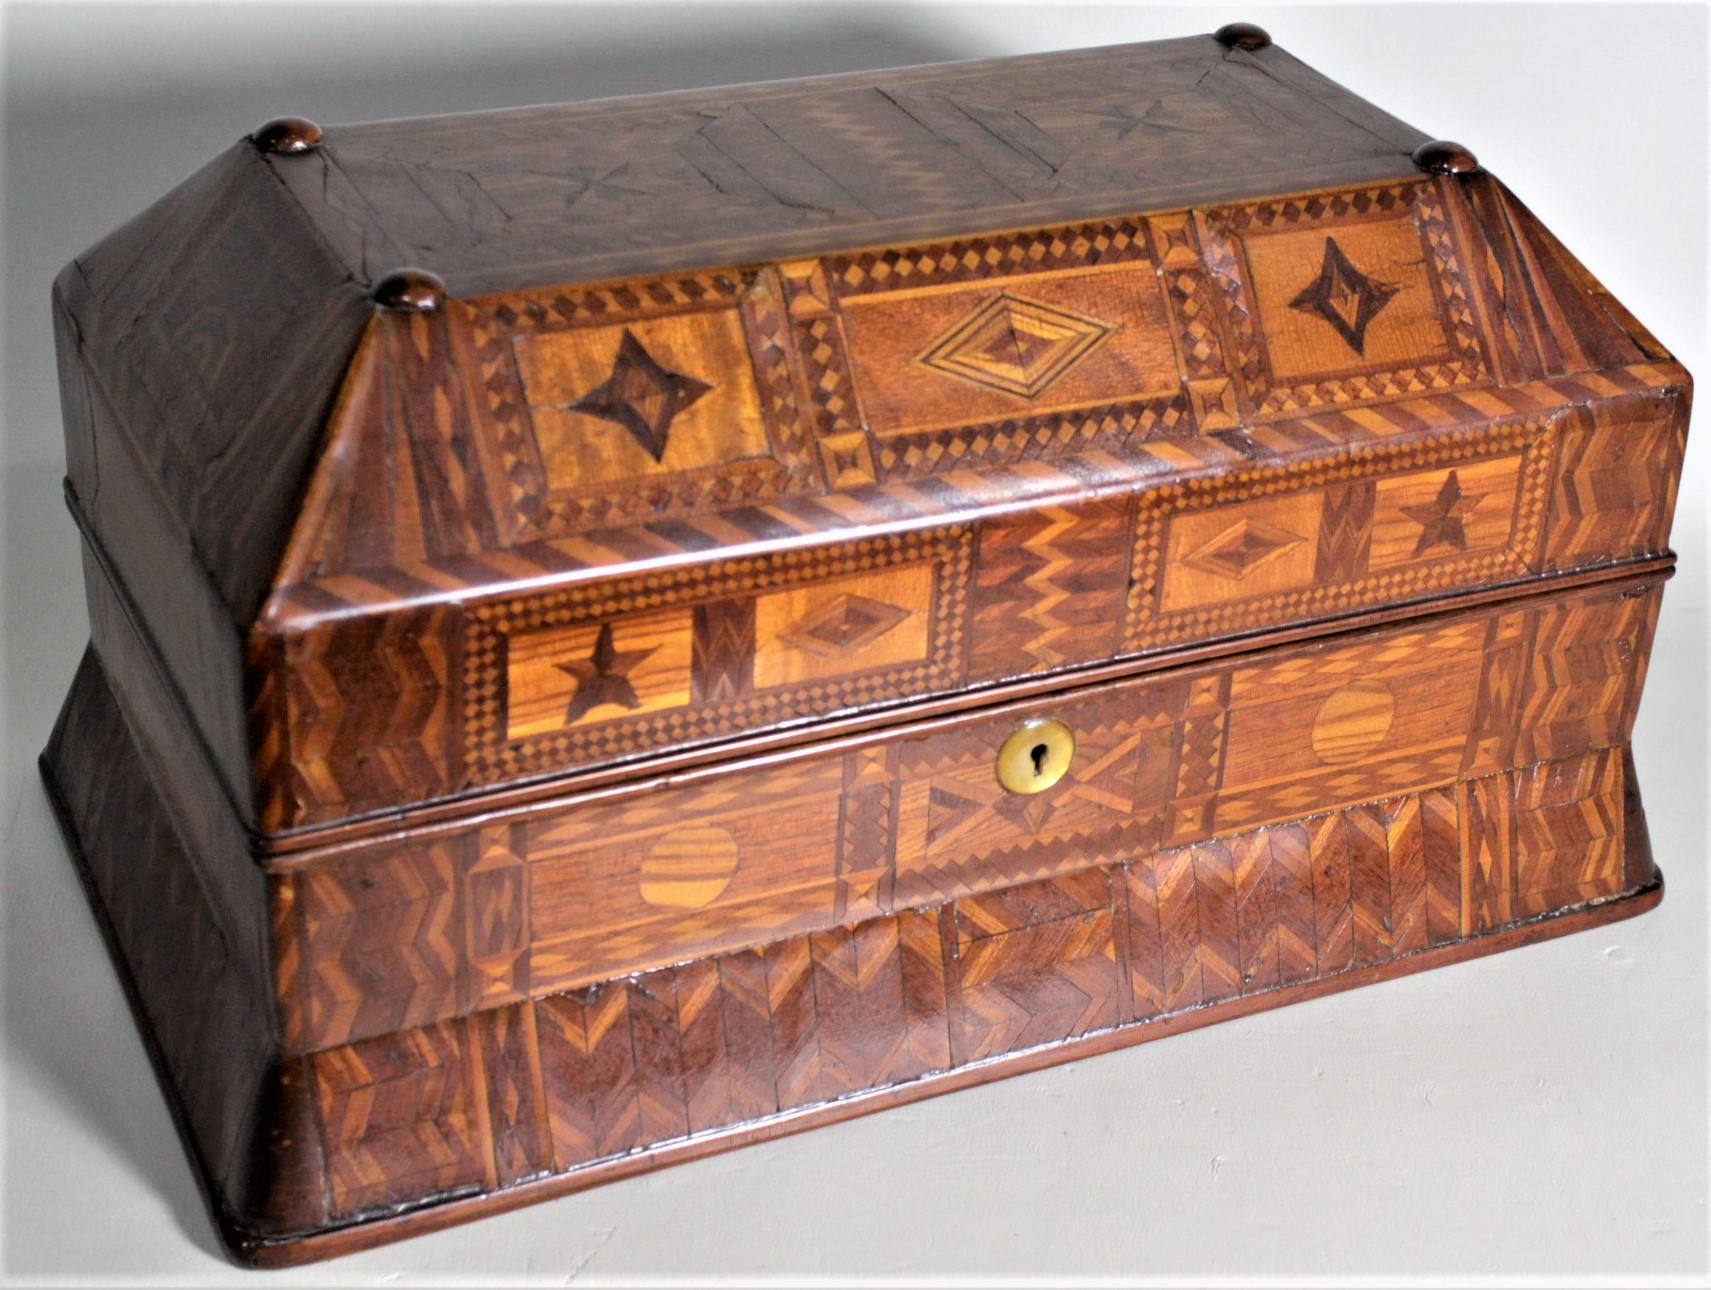 This exquisite antique parquetry writing box or lap desk is unsigned, but presumed to have been made in Canada in approximately 1900 in a Folk Art style. The box itself, including the interior is completely and masterfully handcrafted and a raised